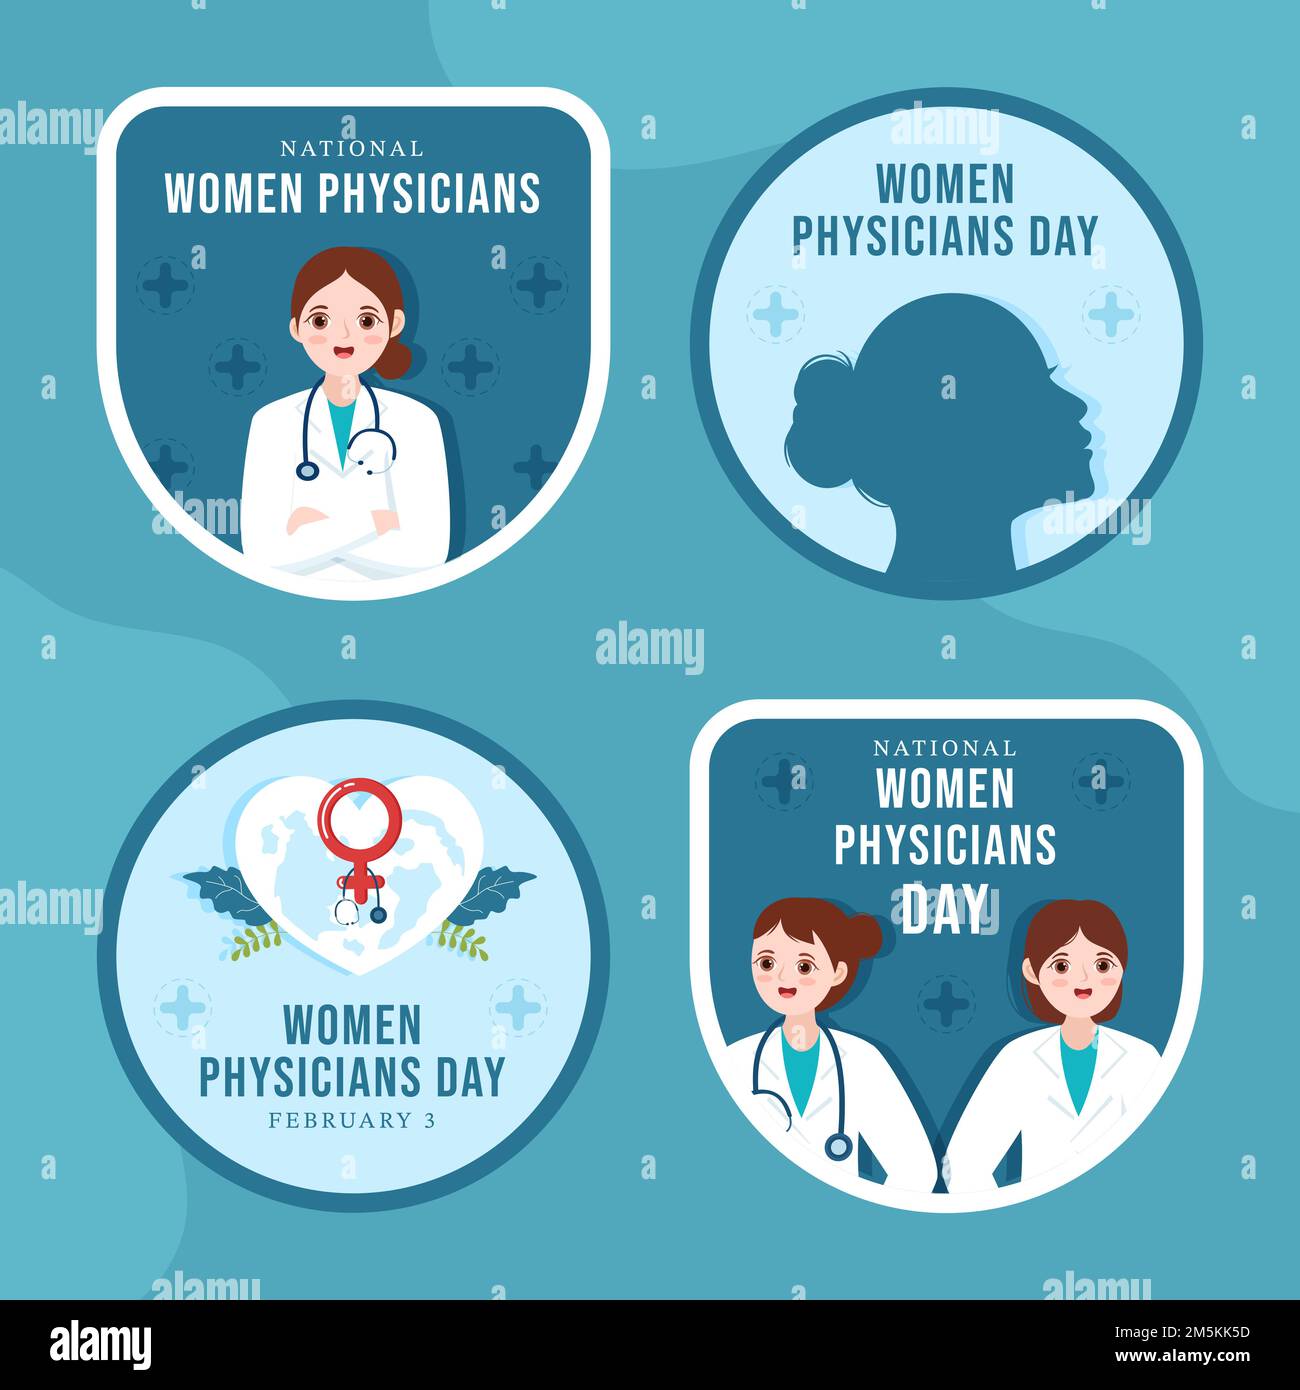 National Women Physicians Day Label Flat Cartoon Hand Drawn Templates Illustration Stock Vector